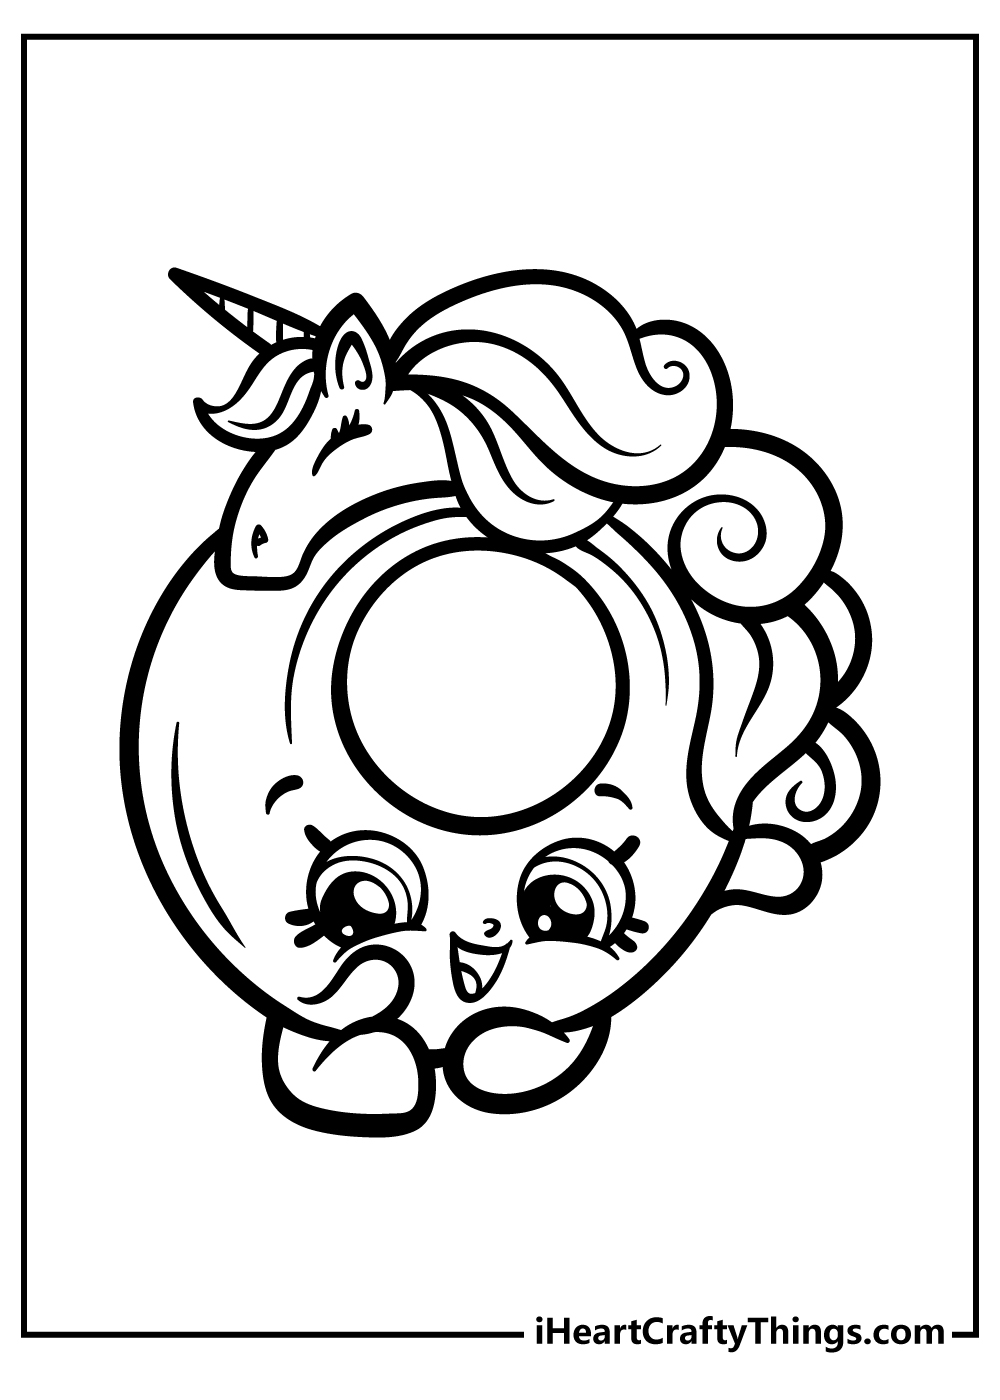 Shopkins coloring pages free printable